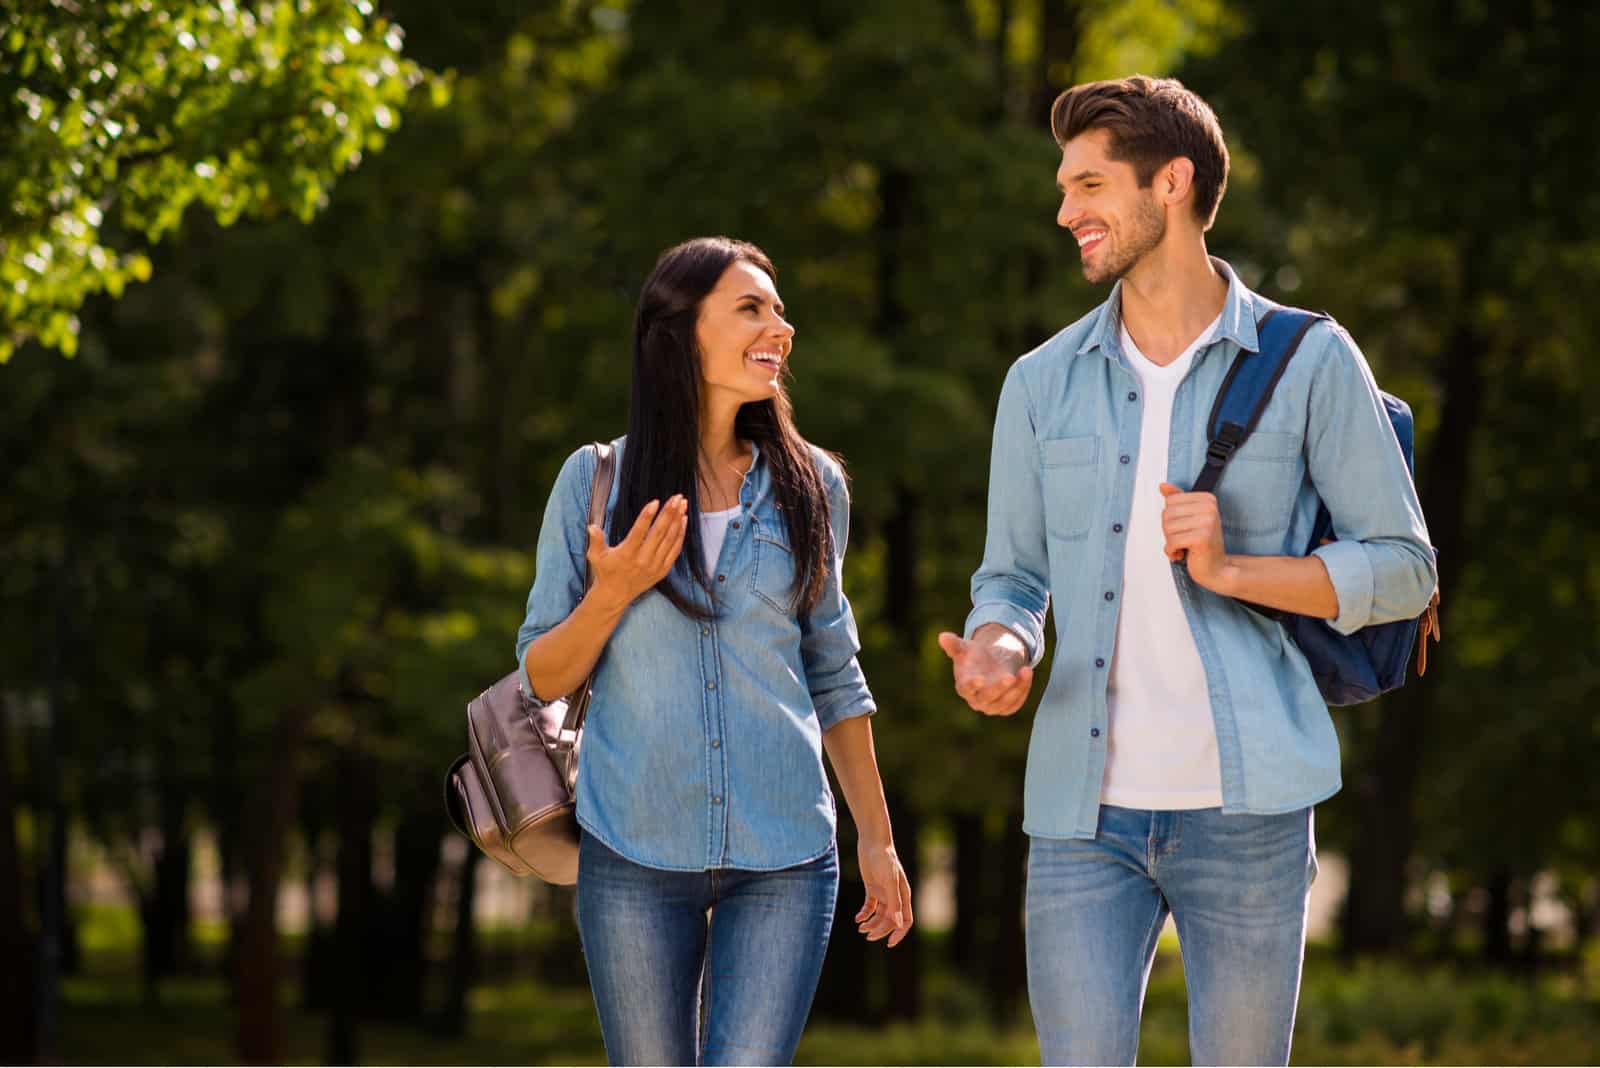 a smiling man and woman walk through the park and talk